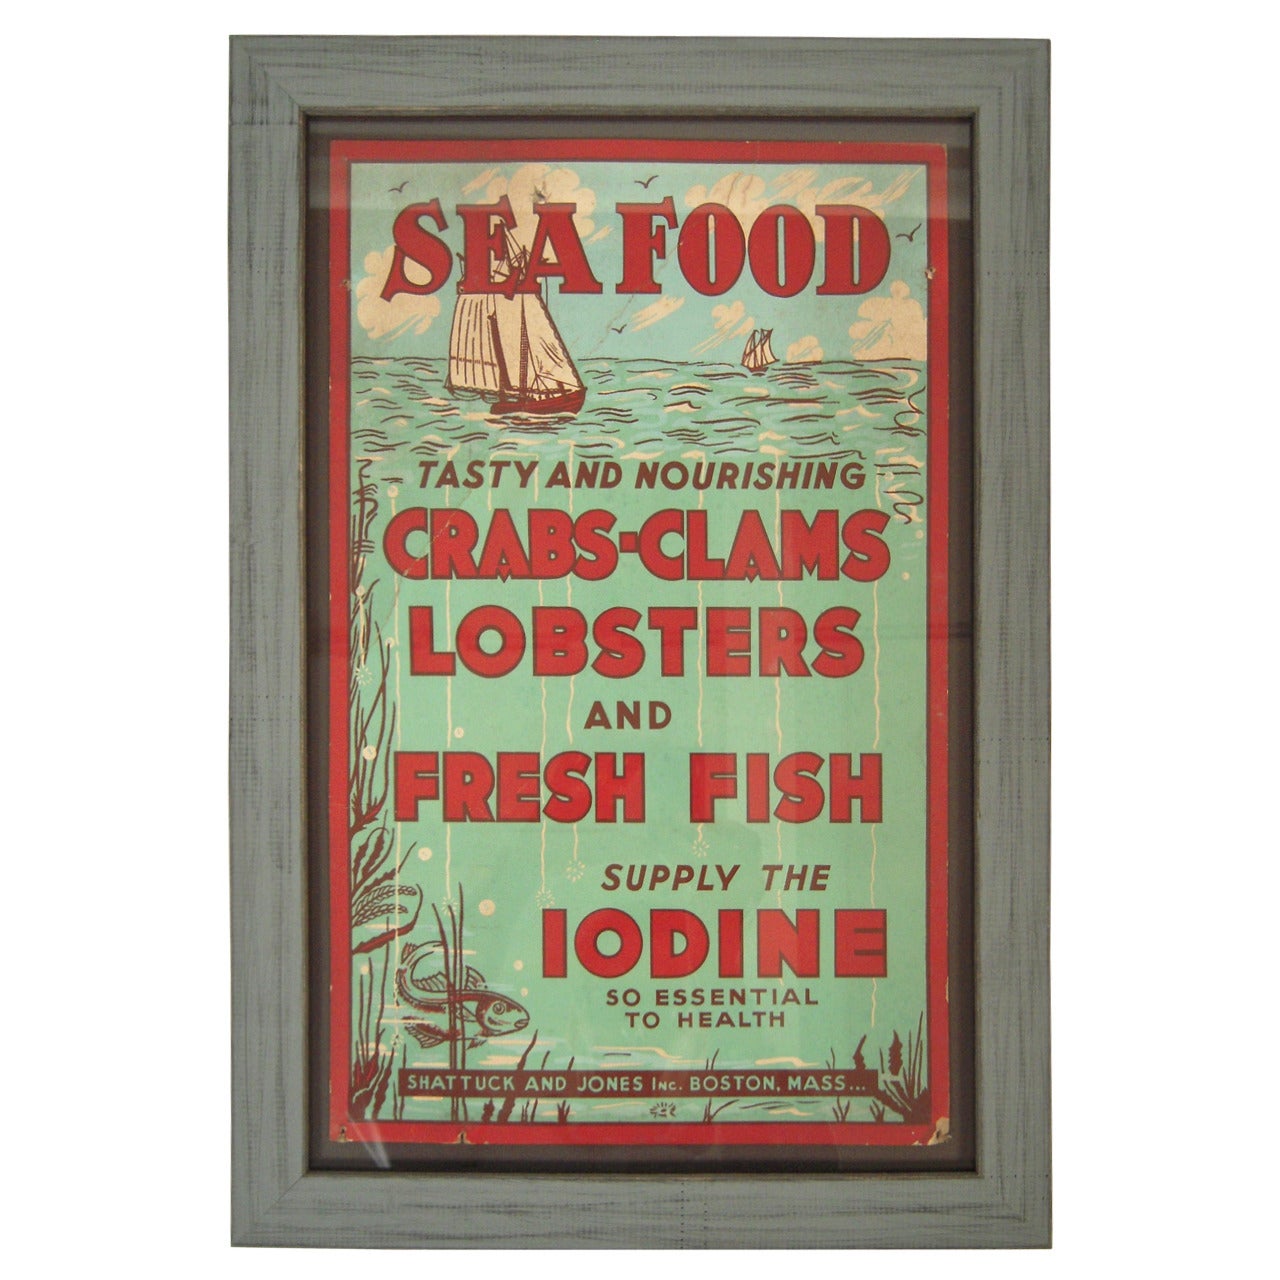 "Tasty and Nourishing Seafood" Poster